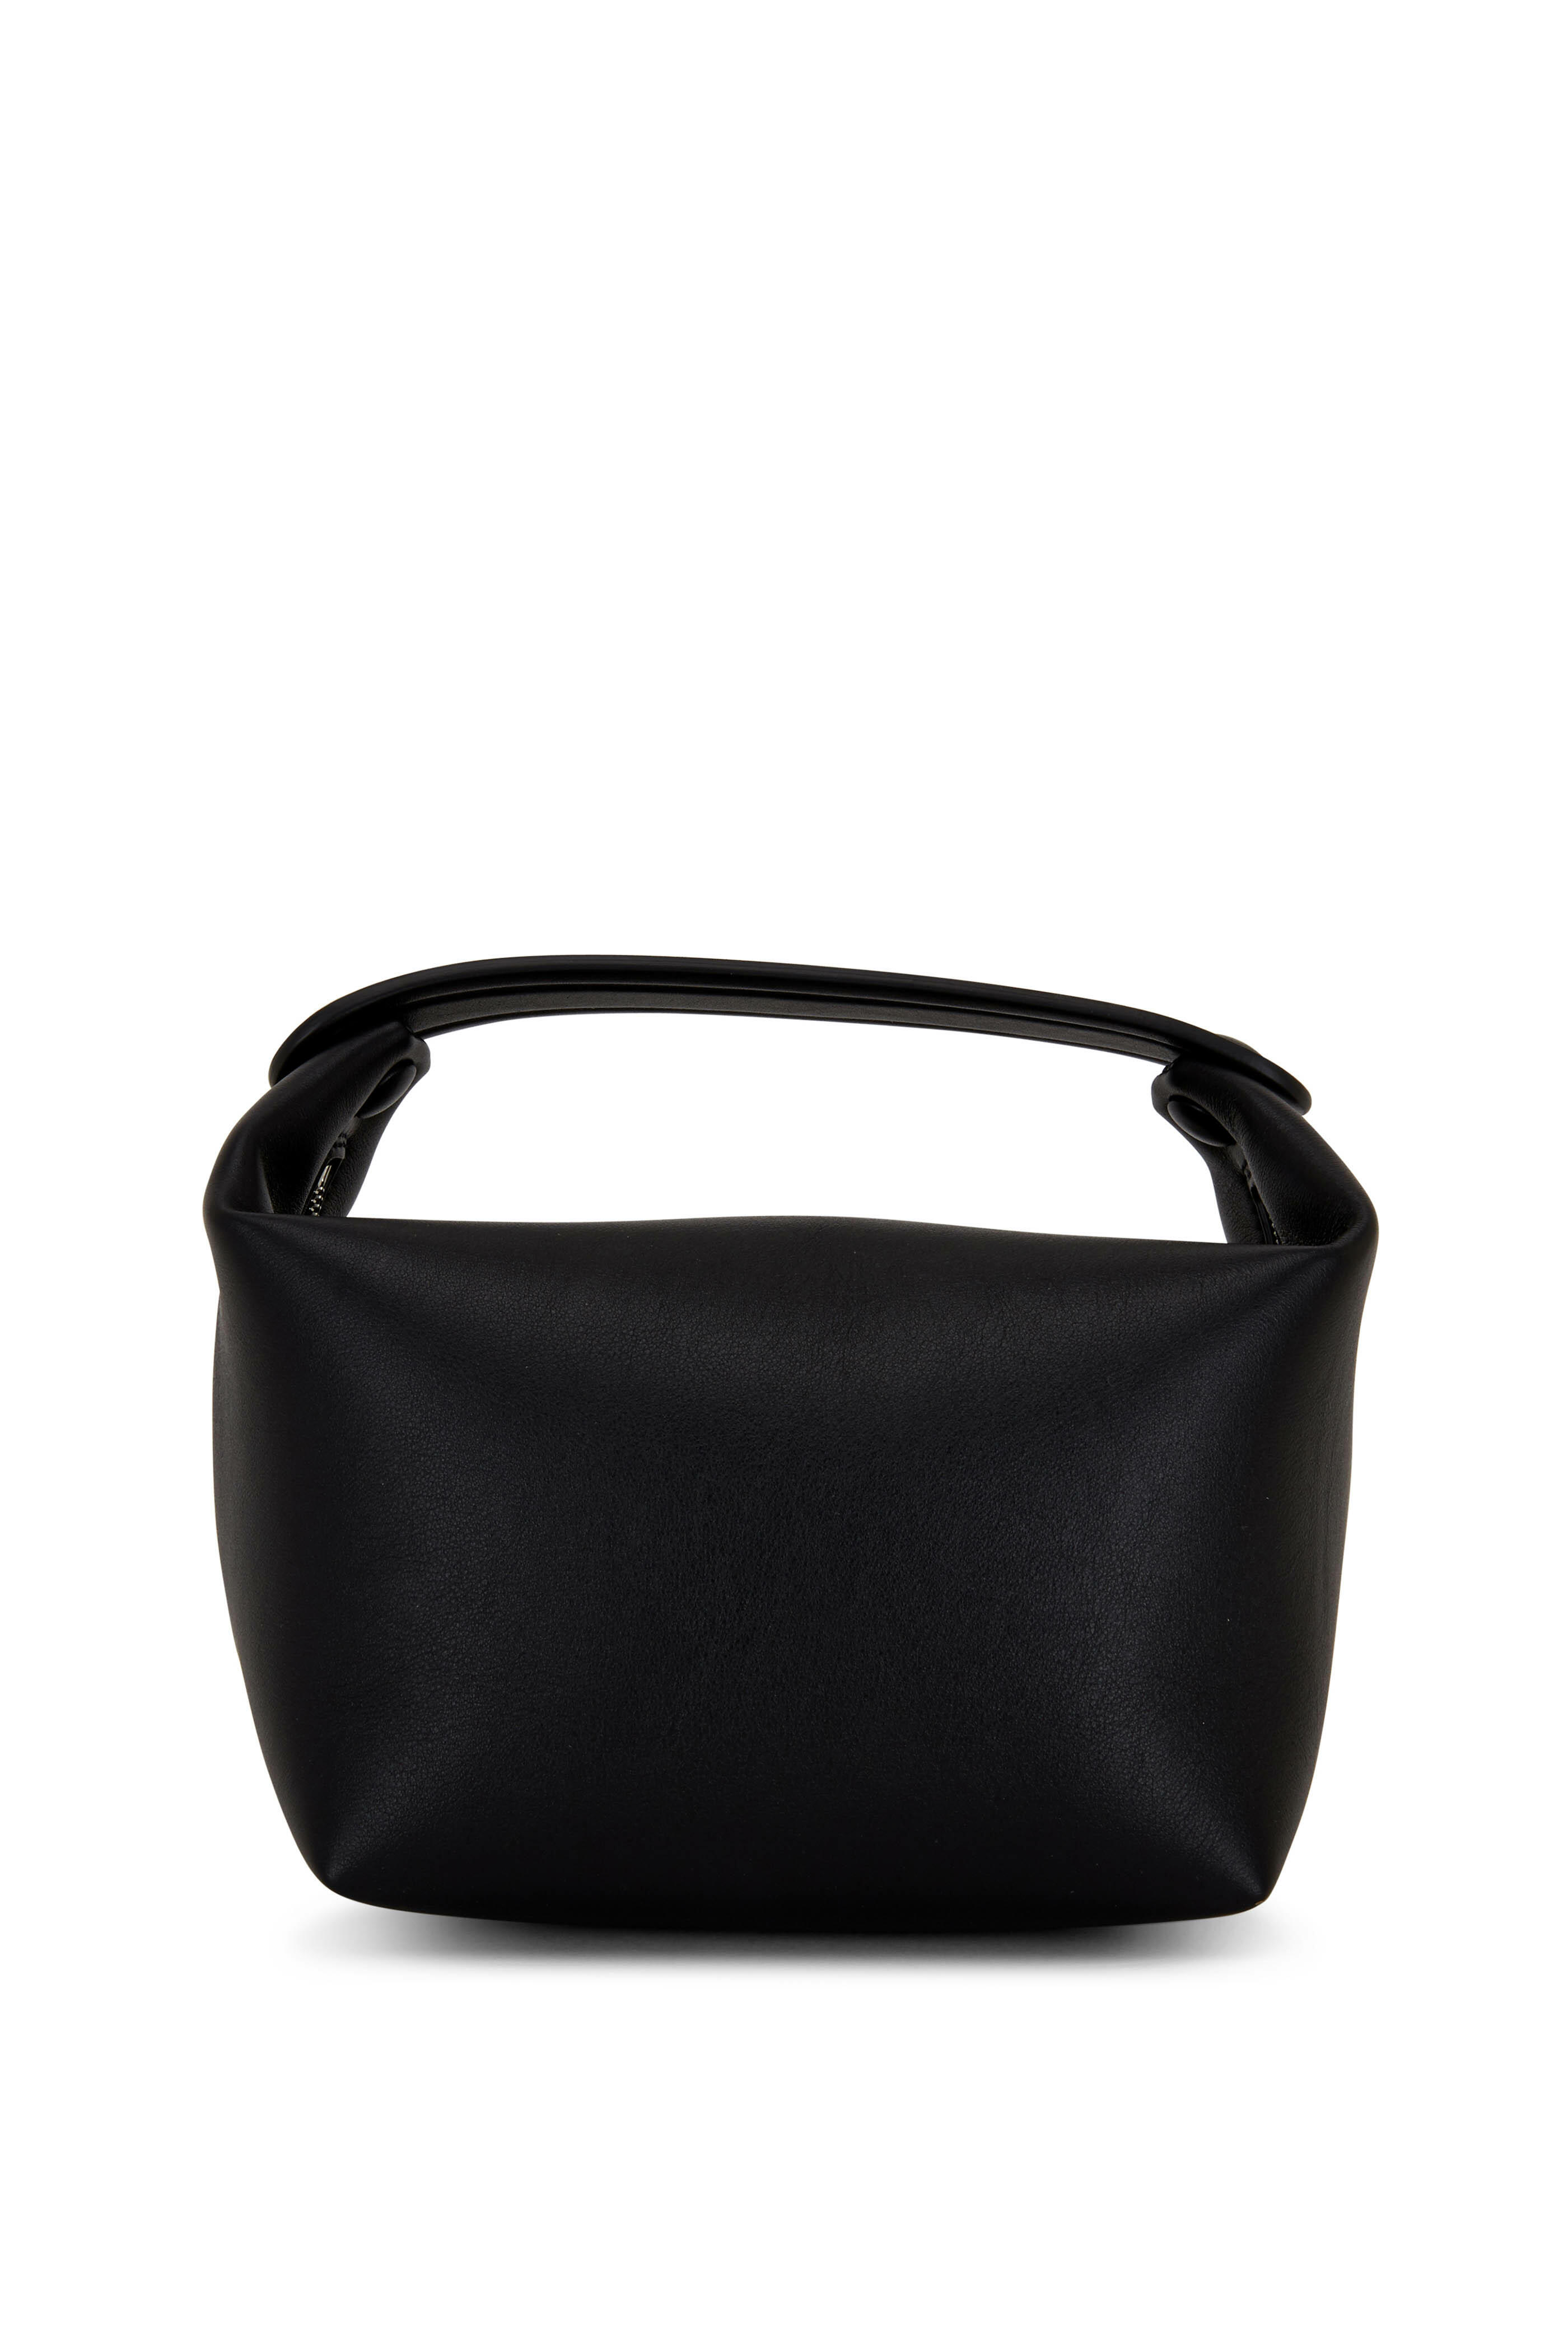 The Row - Les Bains Black Smooth Leather Top Handle Bag